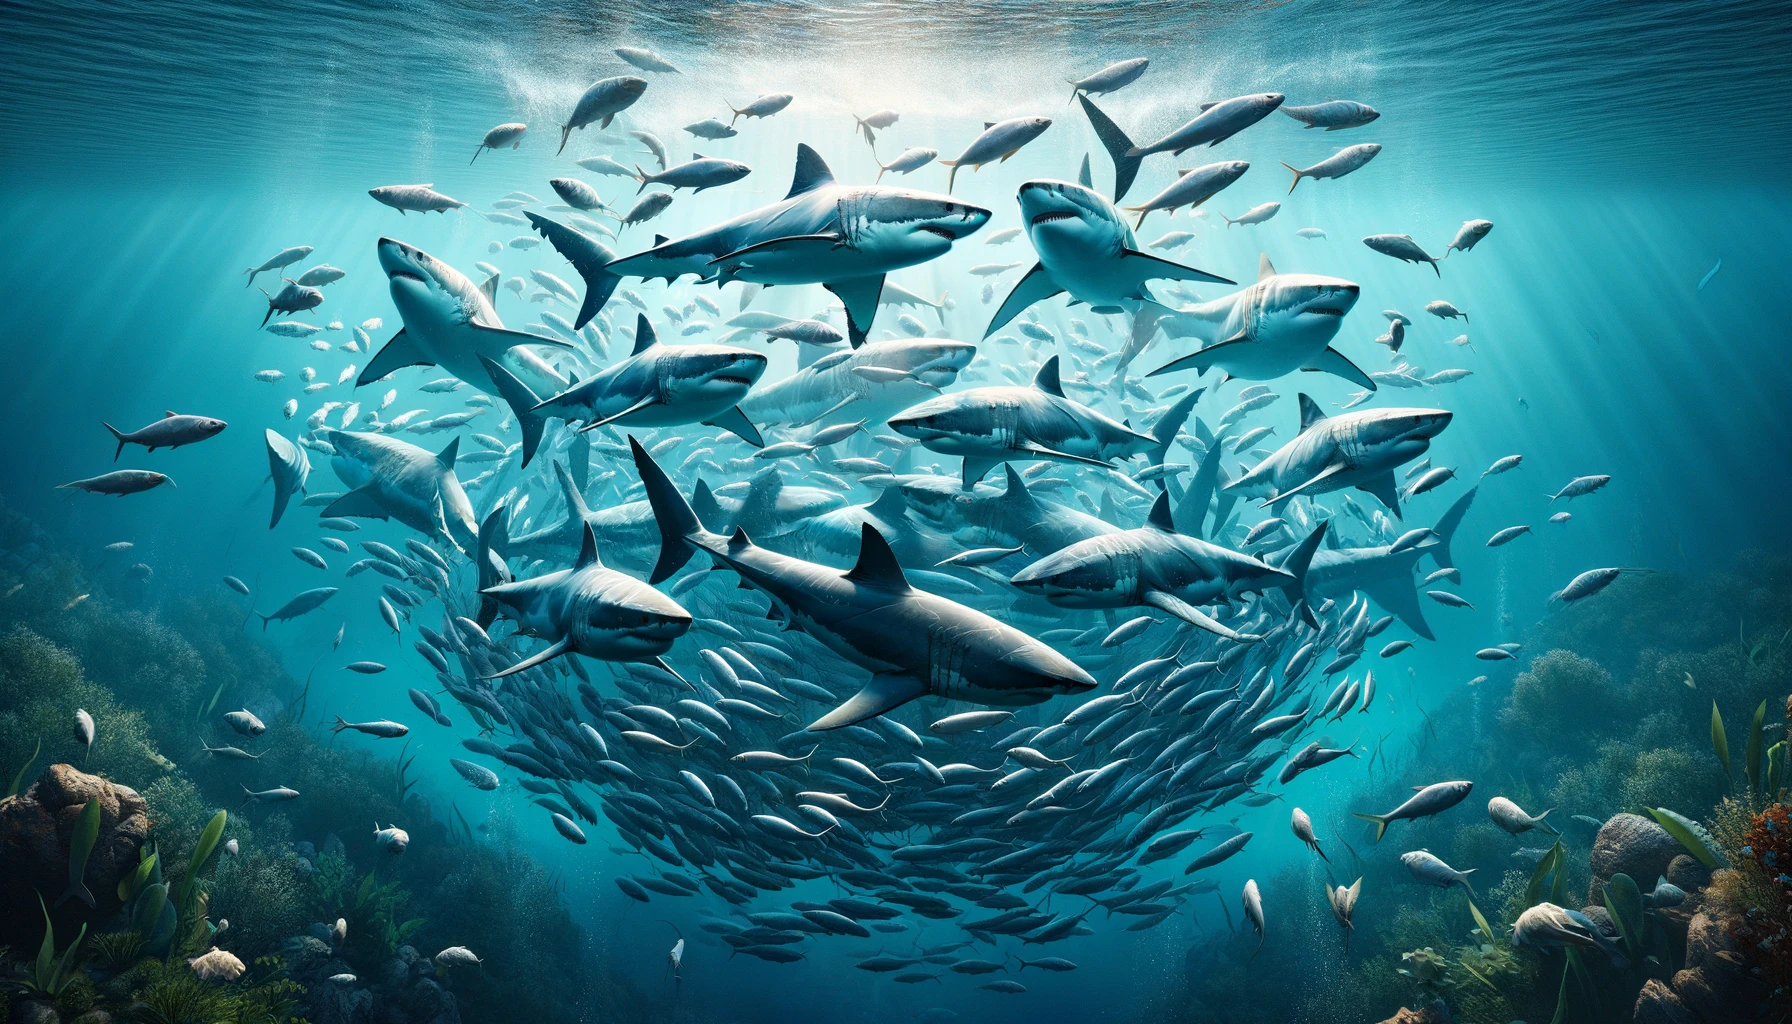 DALL·E 2024 03 09 11.30.46 Imagine a breathtaking underwater scene showcasing a group of great white sharks circling together hinting at a social gathering rather than aggressi